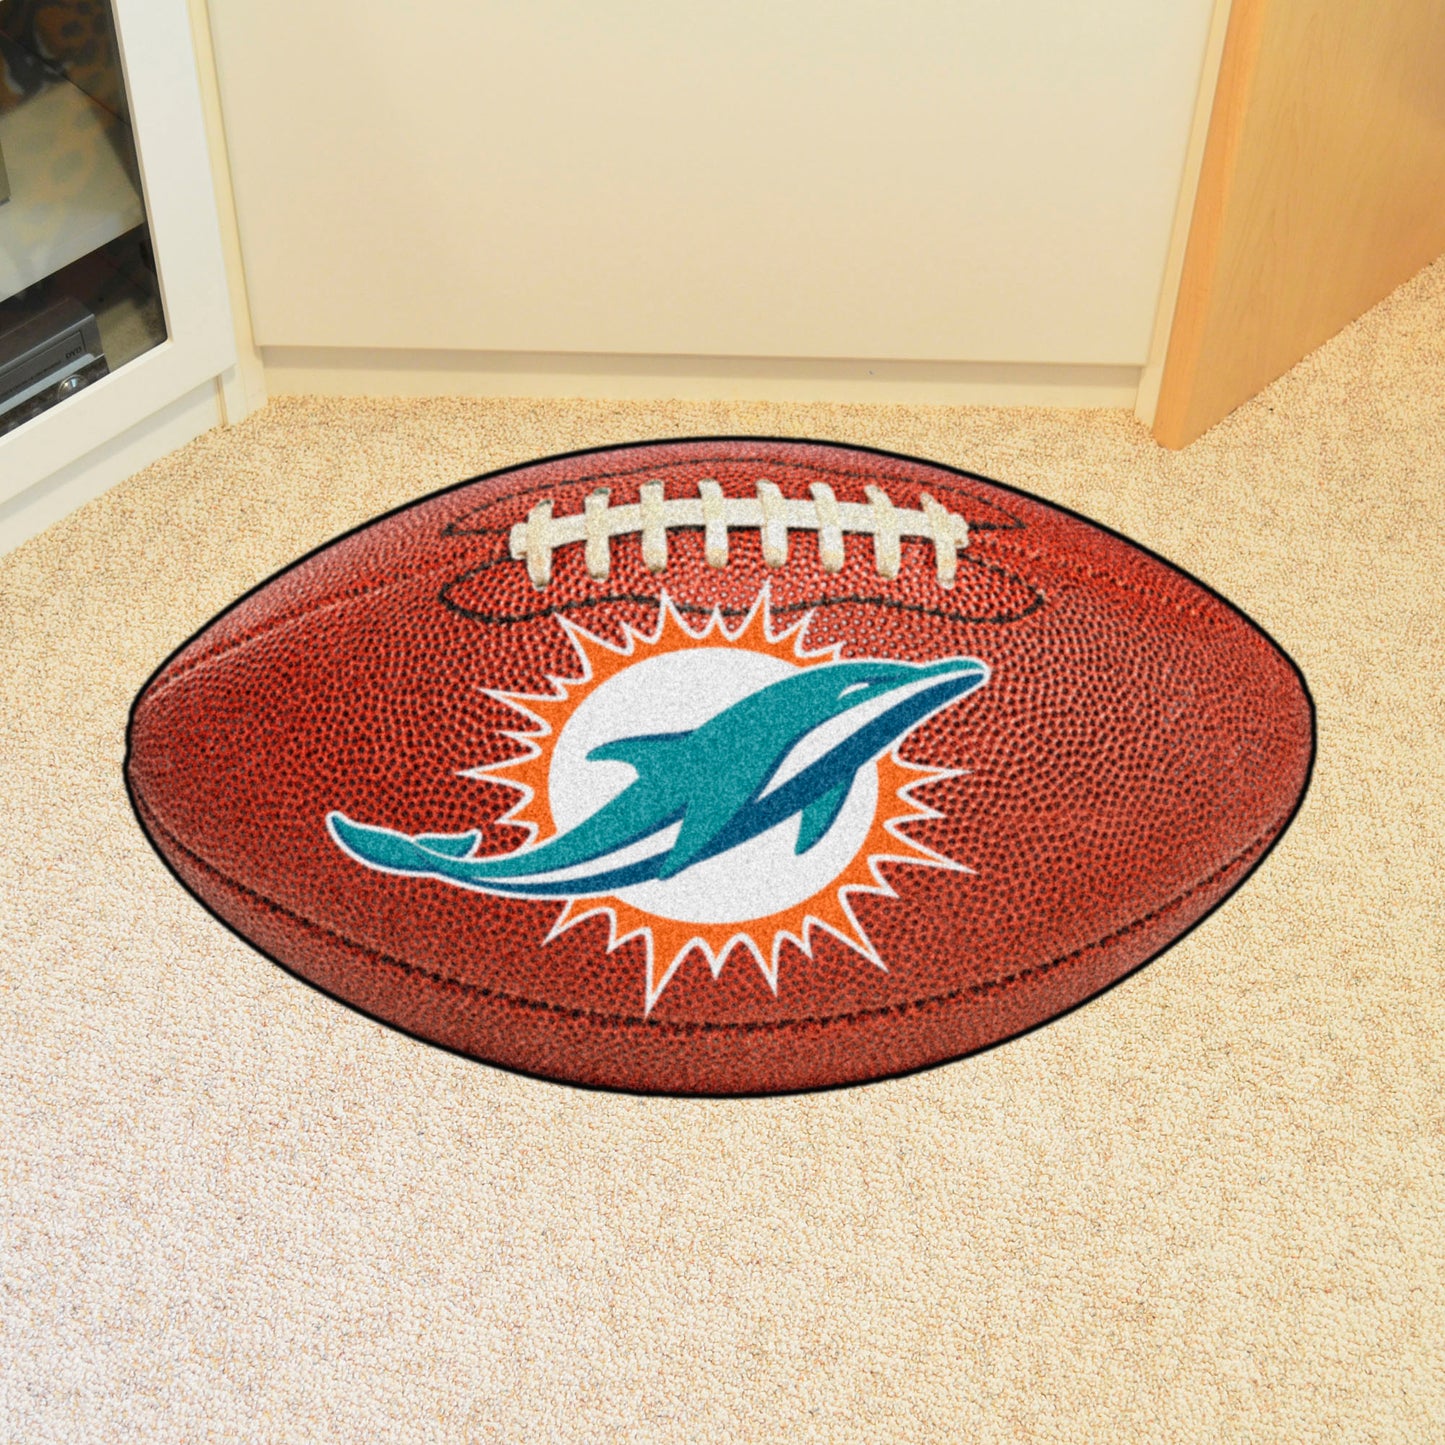 Miami Dolphins Football Rug - 20.5in. x 32.5in.